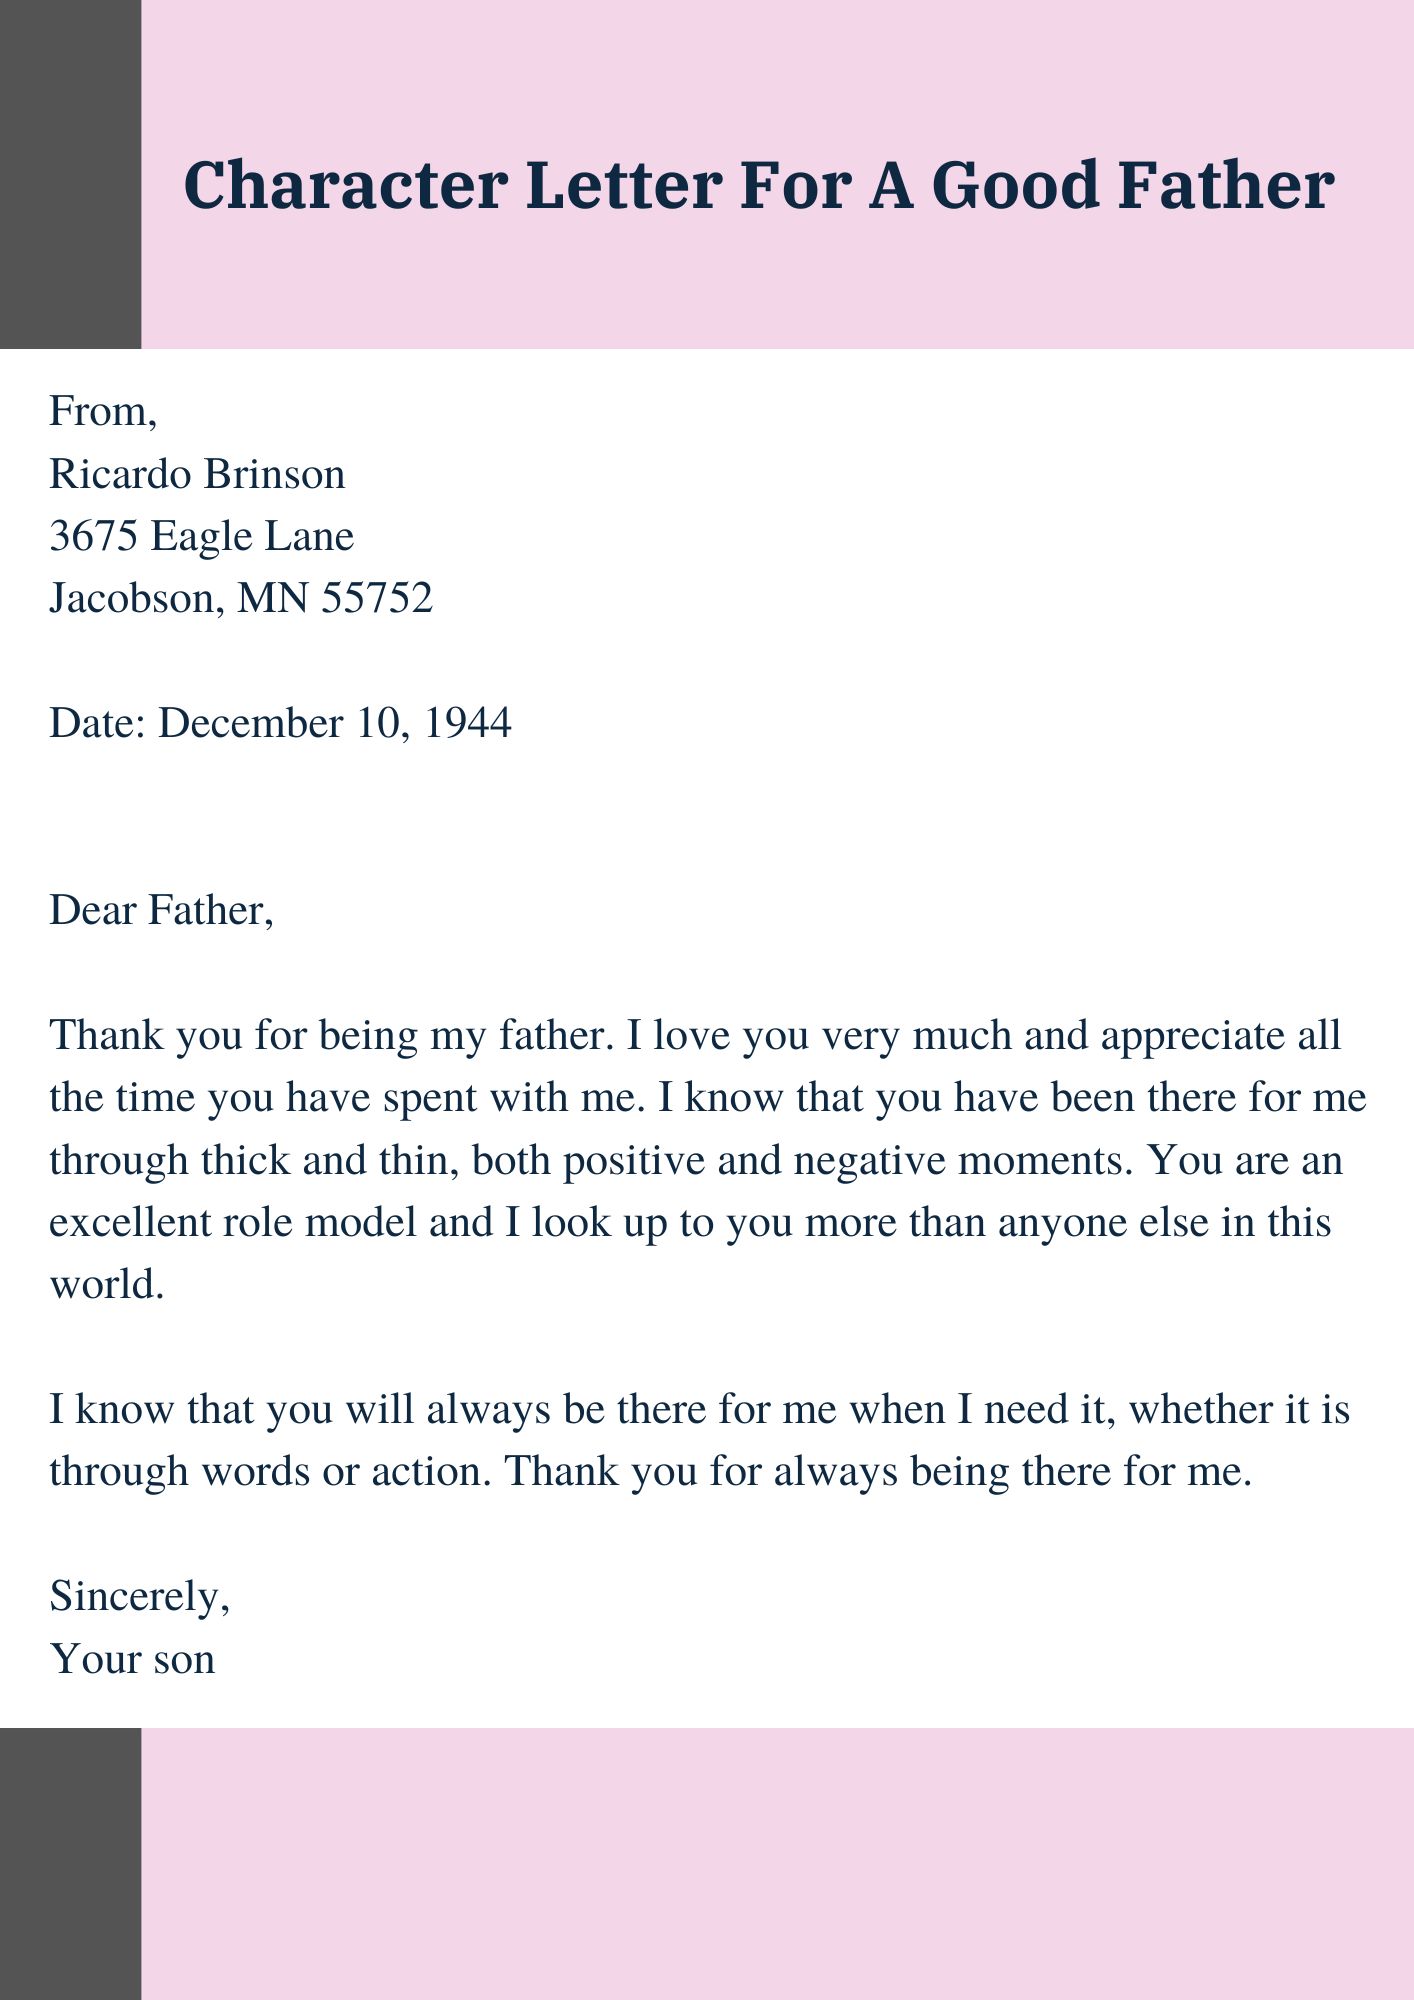 Child Custody Character Letter For A Good Father Example